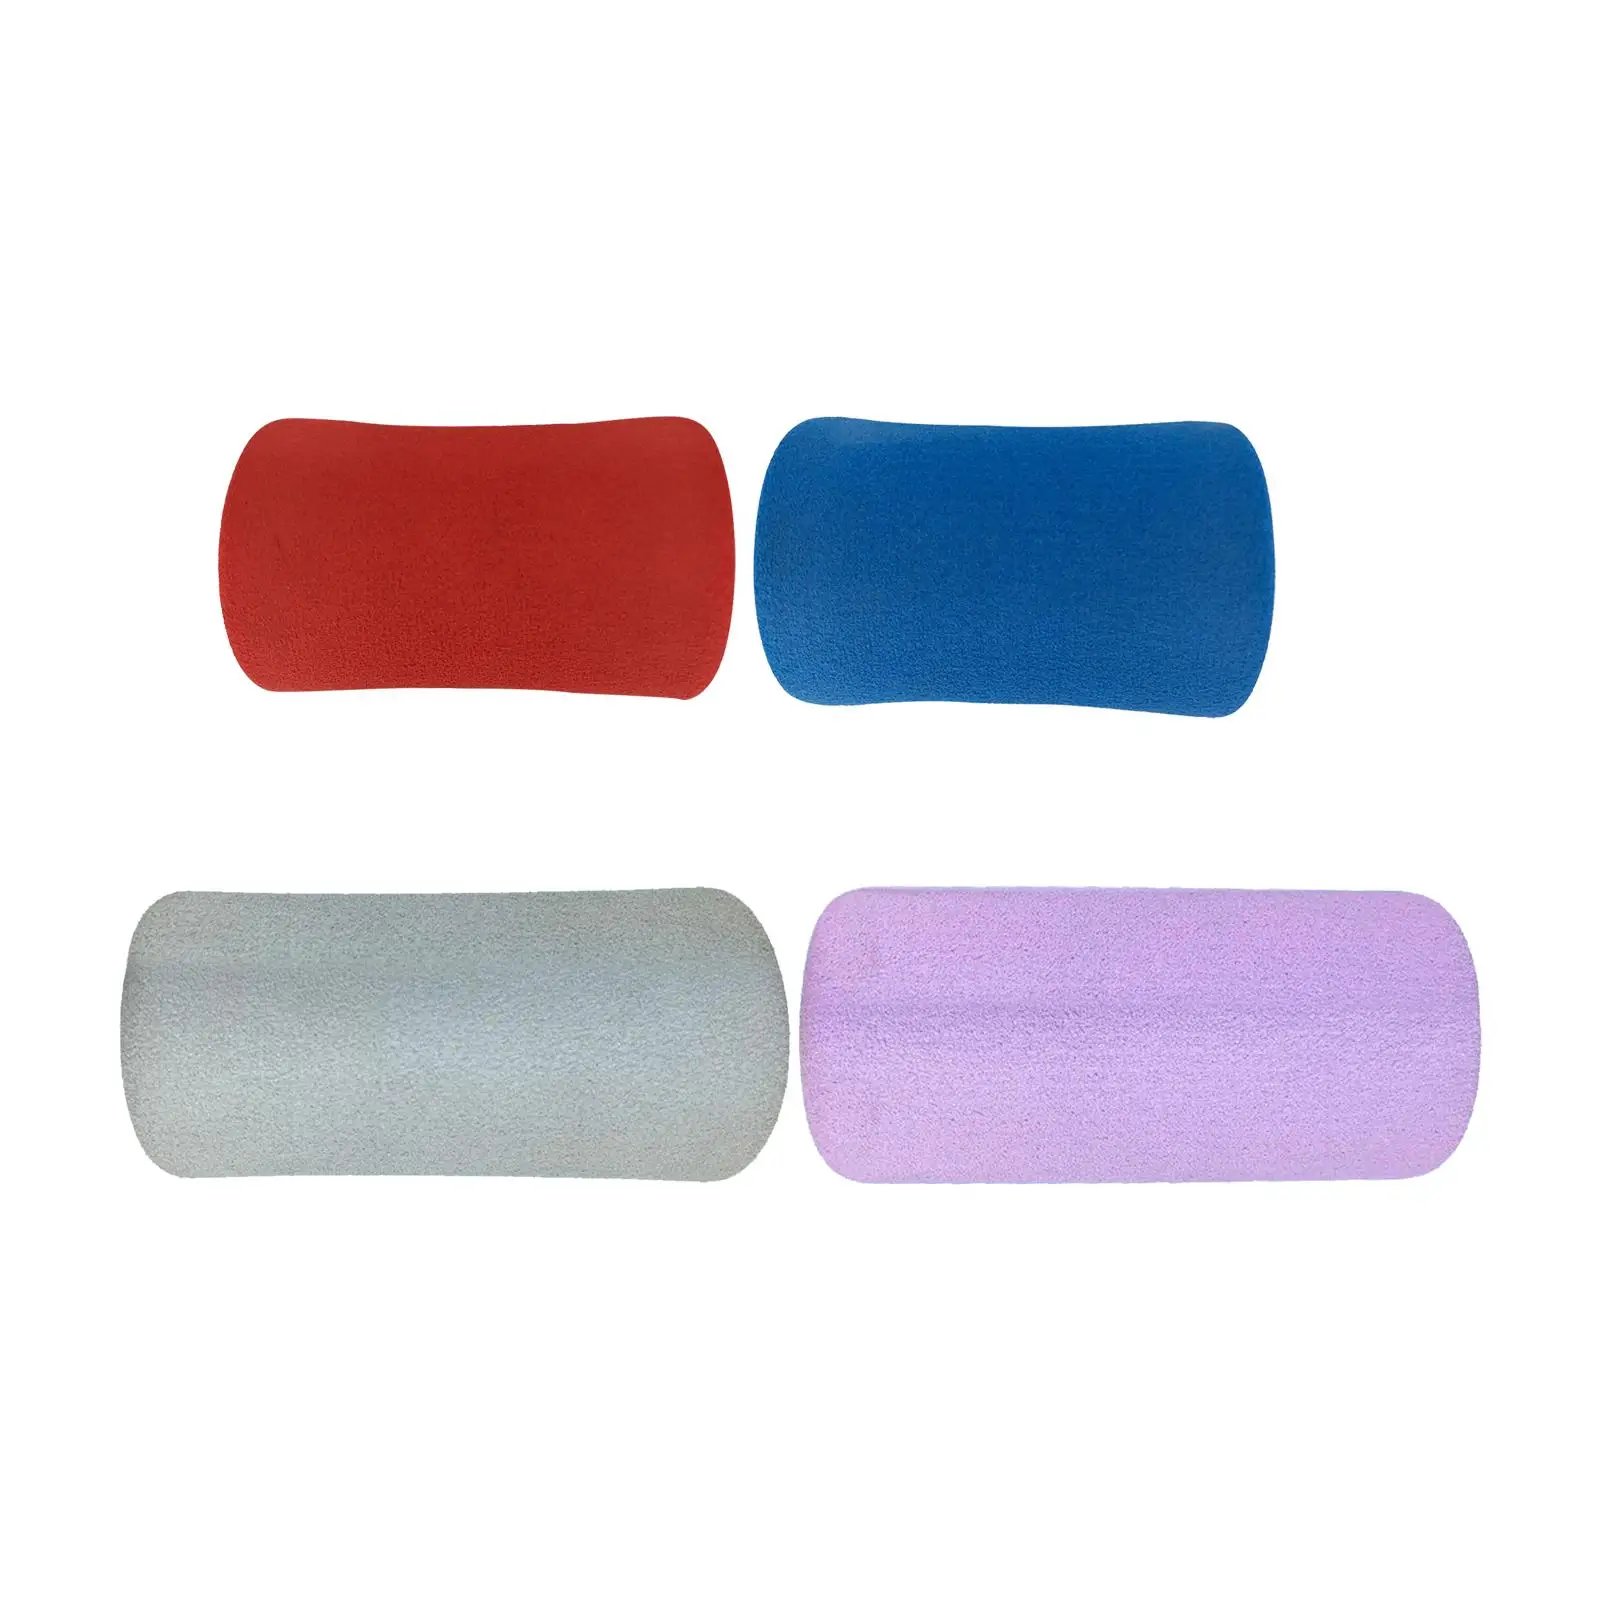 Foam Foot Pads Rollers Replacement Sit up Bench Foam Workout Machine Workout Bench Ab Machine Home Gym Abdominal Trainer